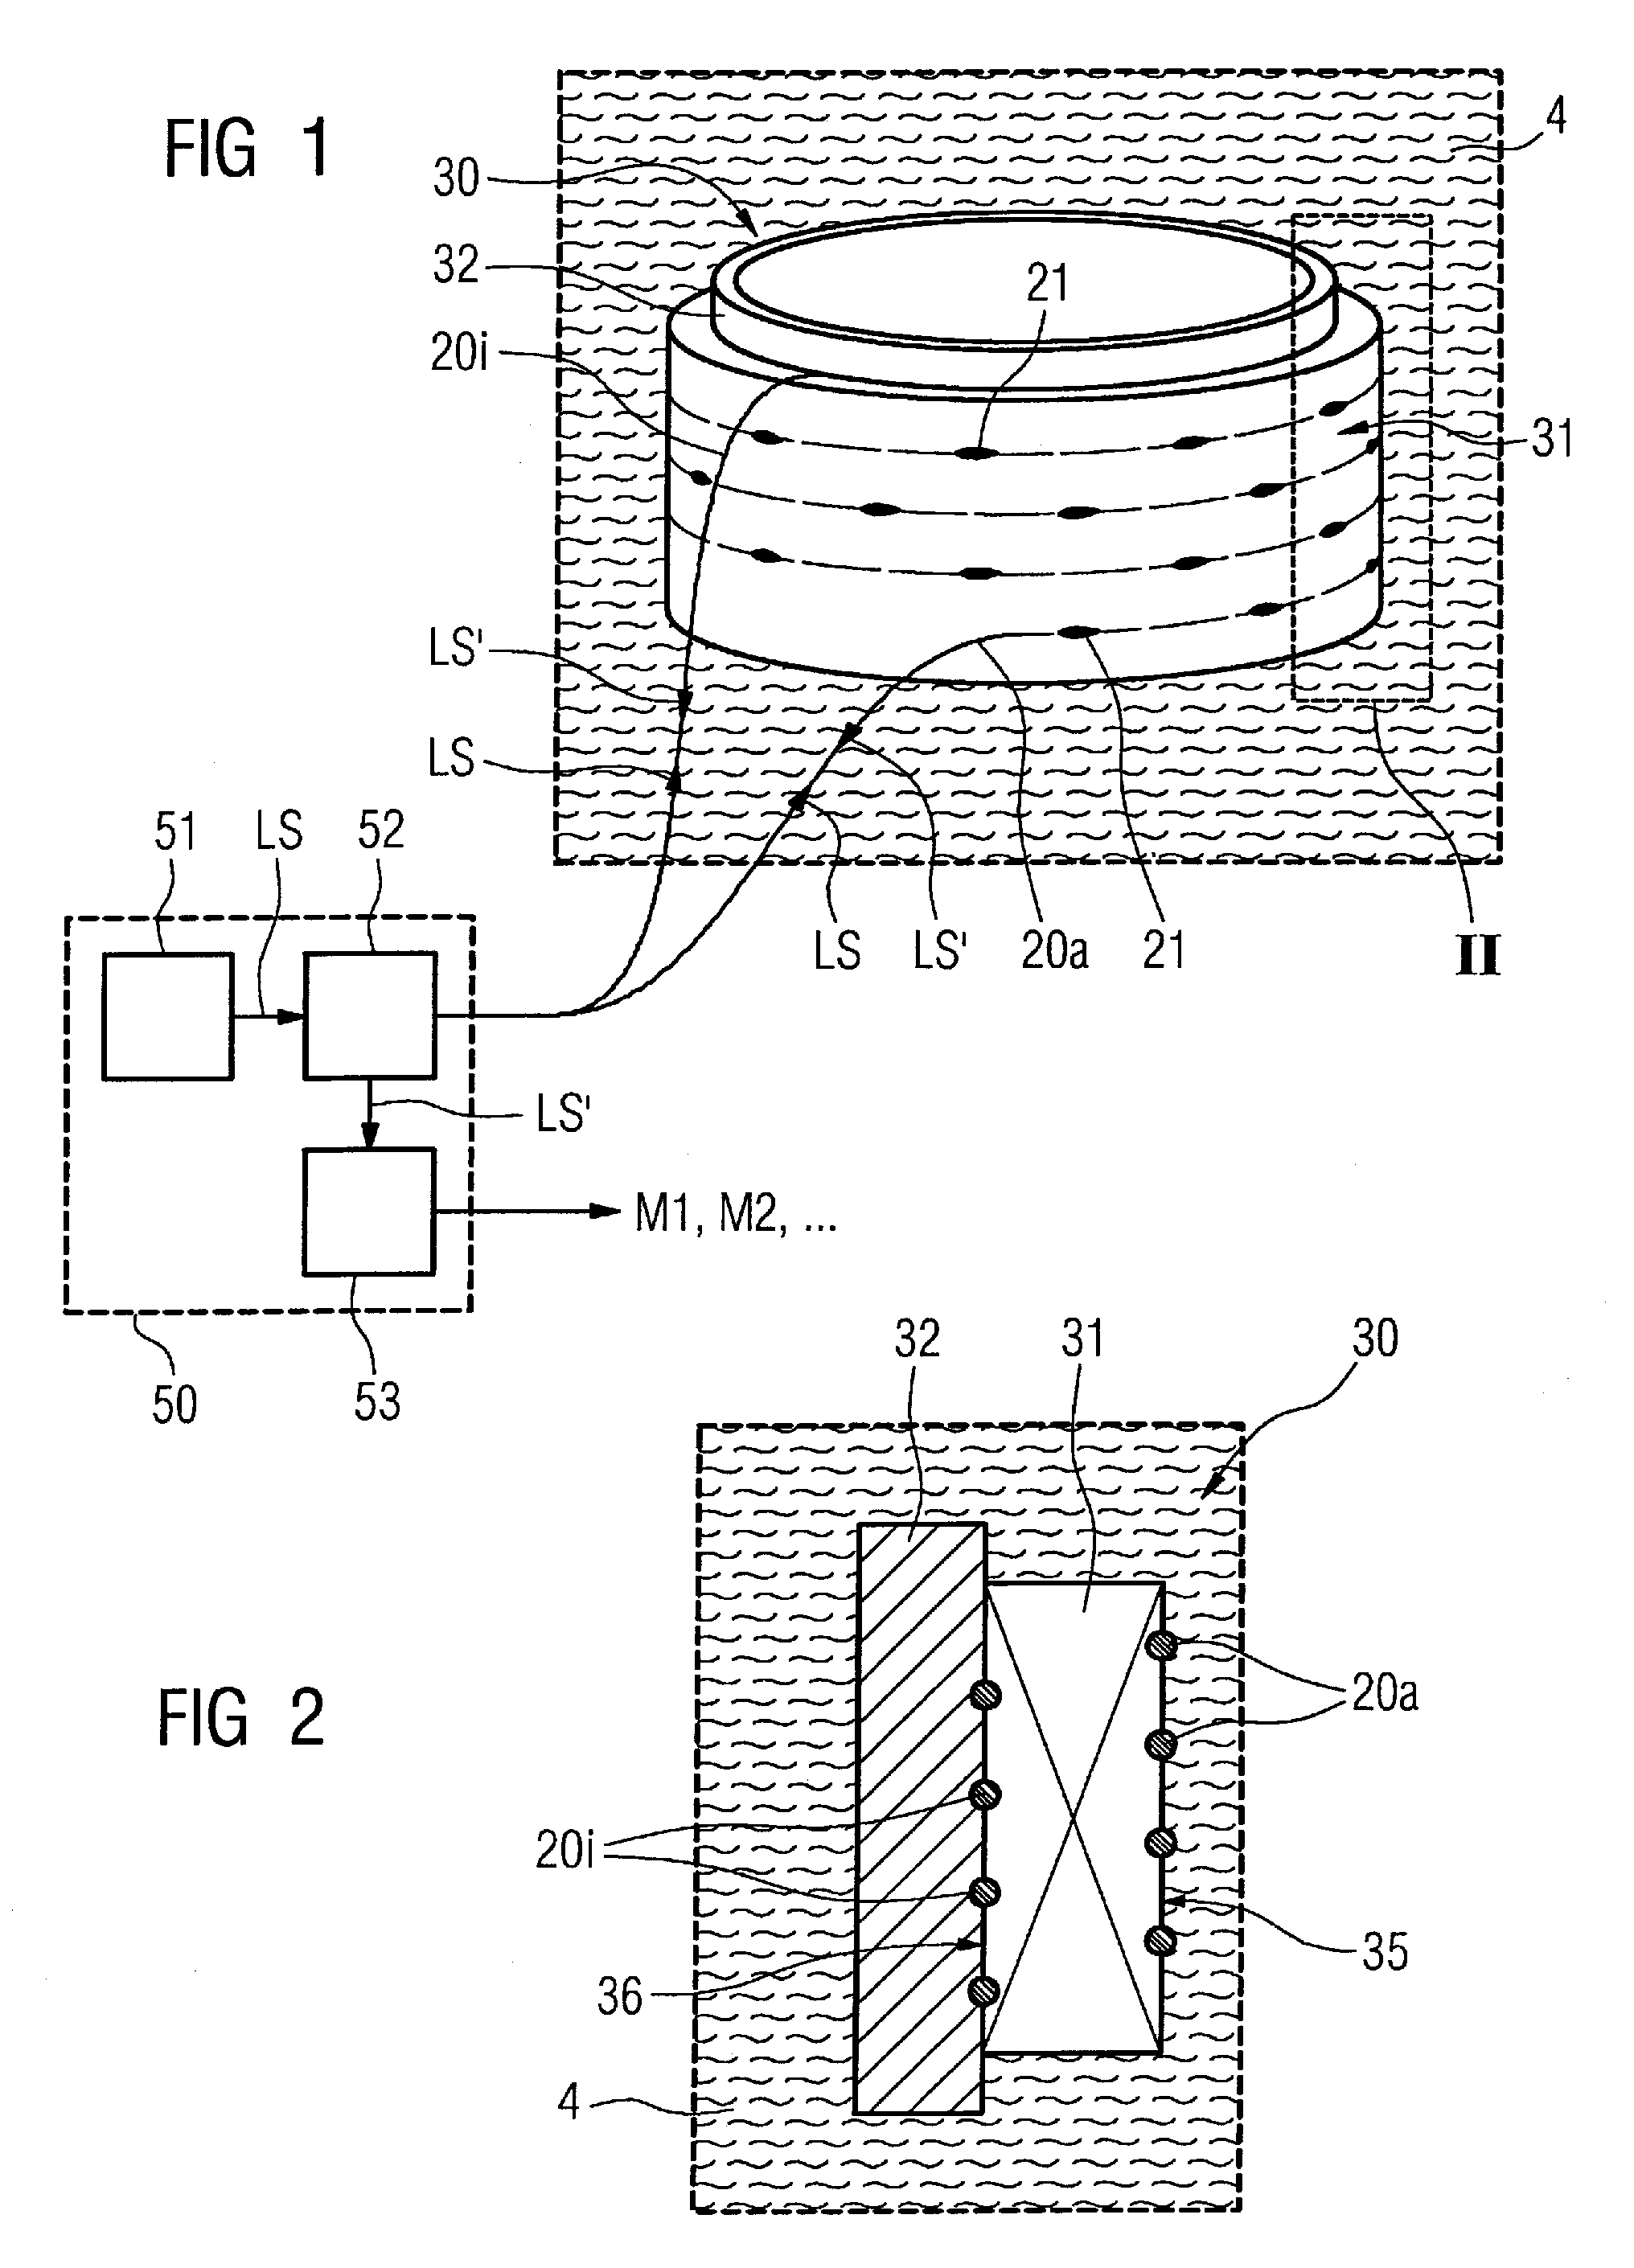 Optical measuring device for determining temperature in a cryogenic environment and winding arrangement whose temperature can be monitored